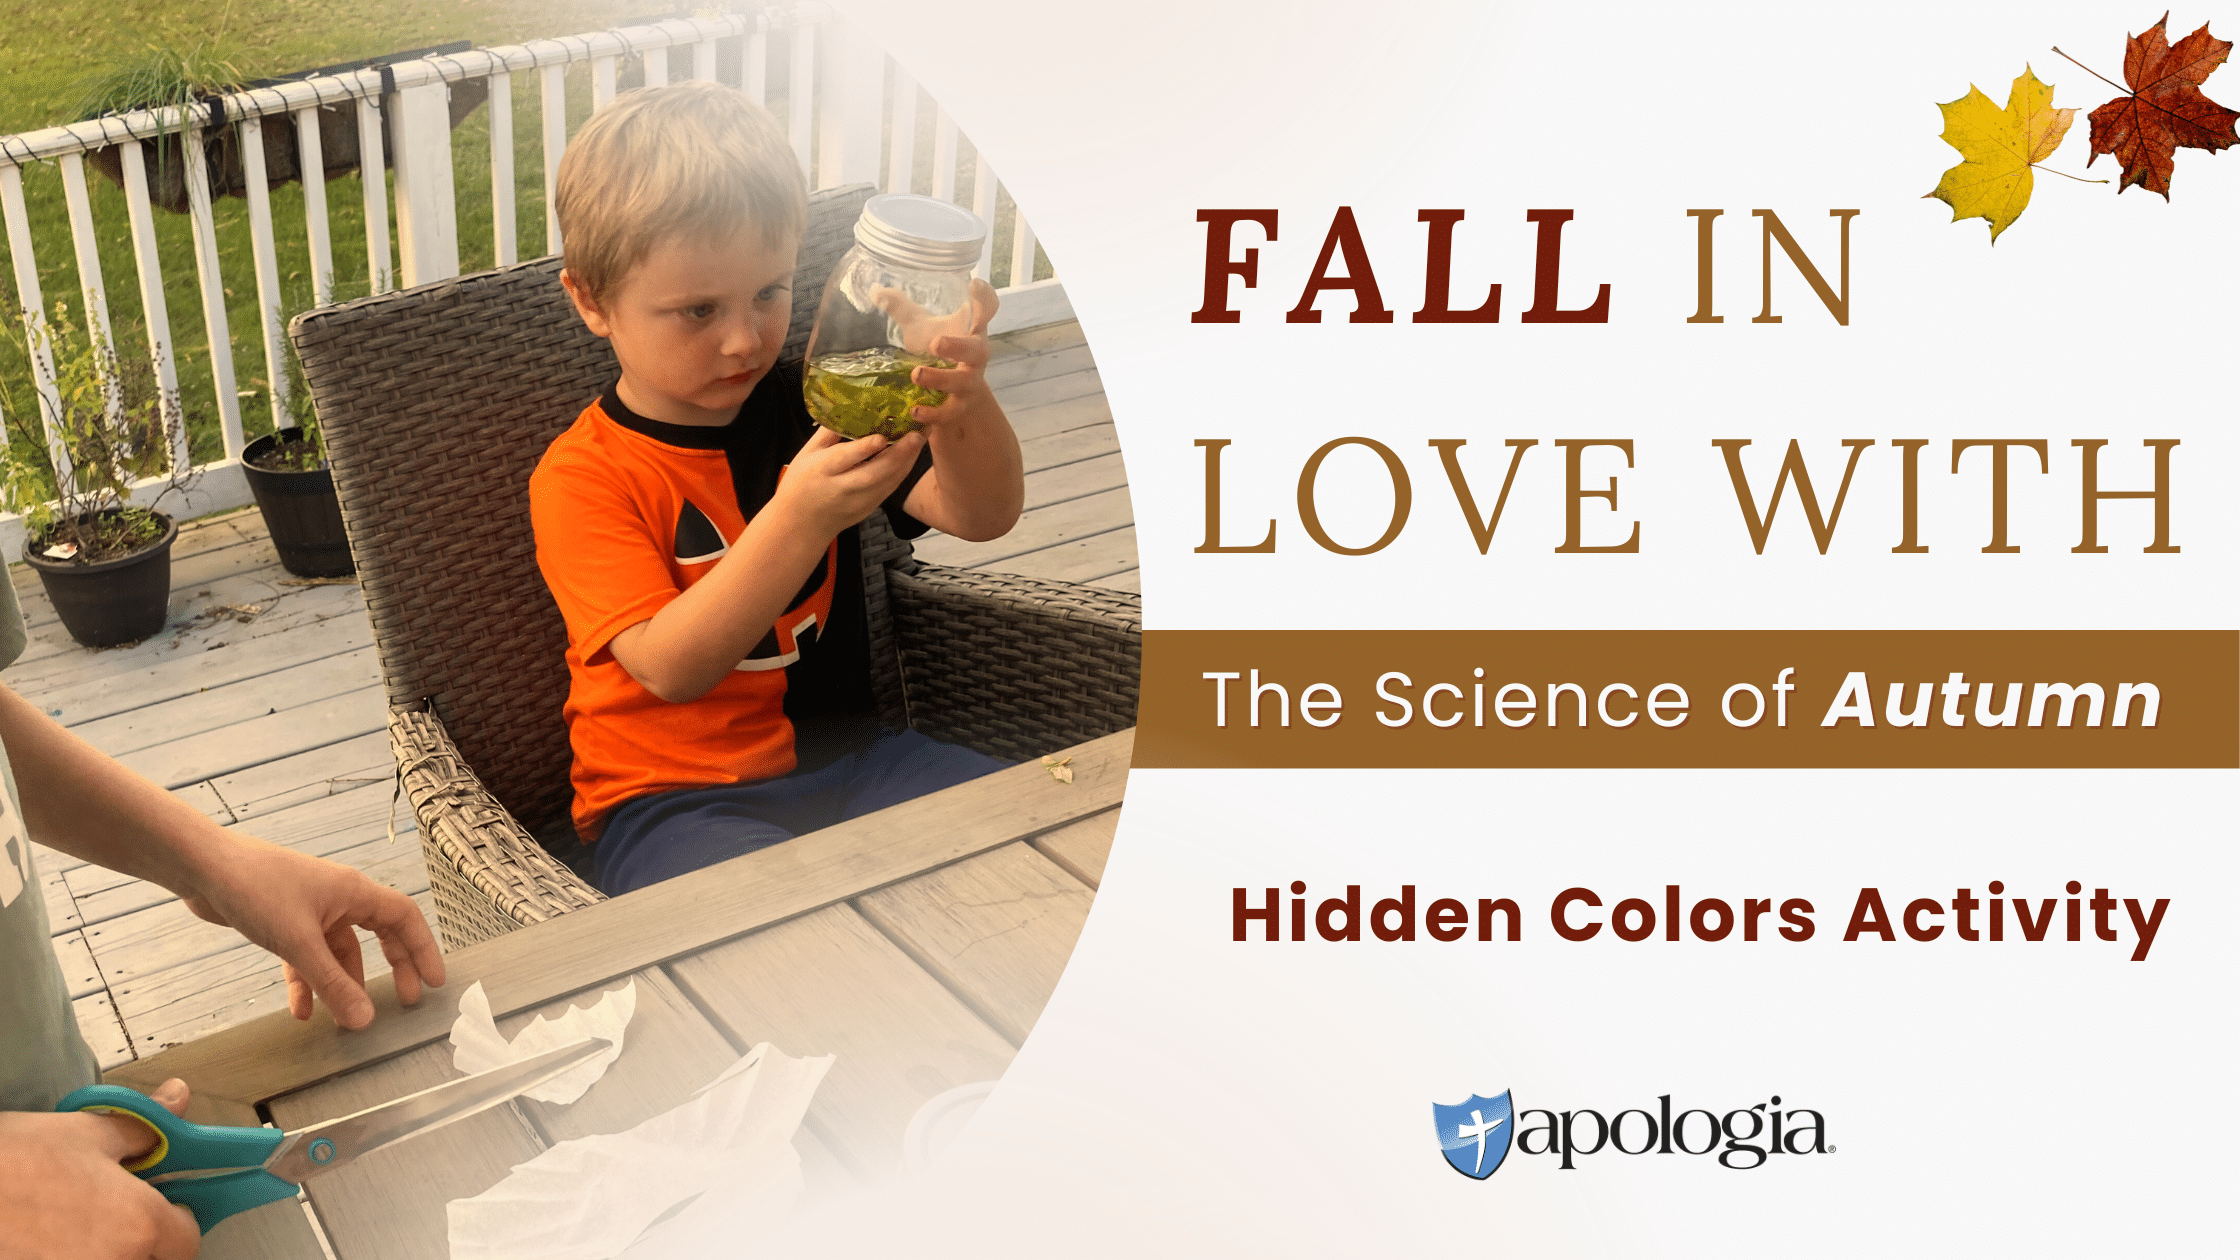 Fall in Love with the Science of Autumn: Hidden Colors Activity